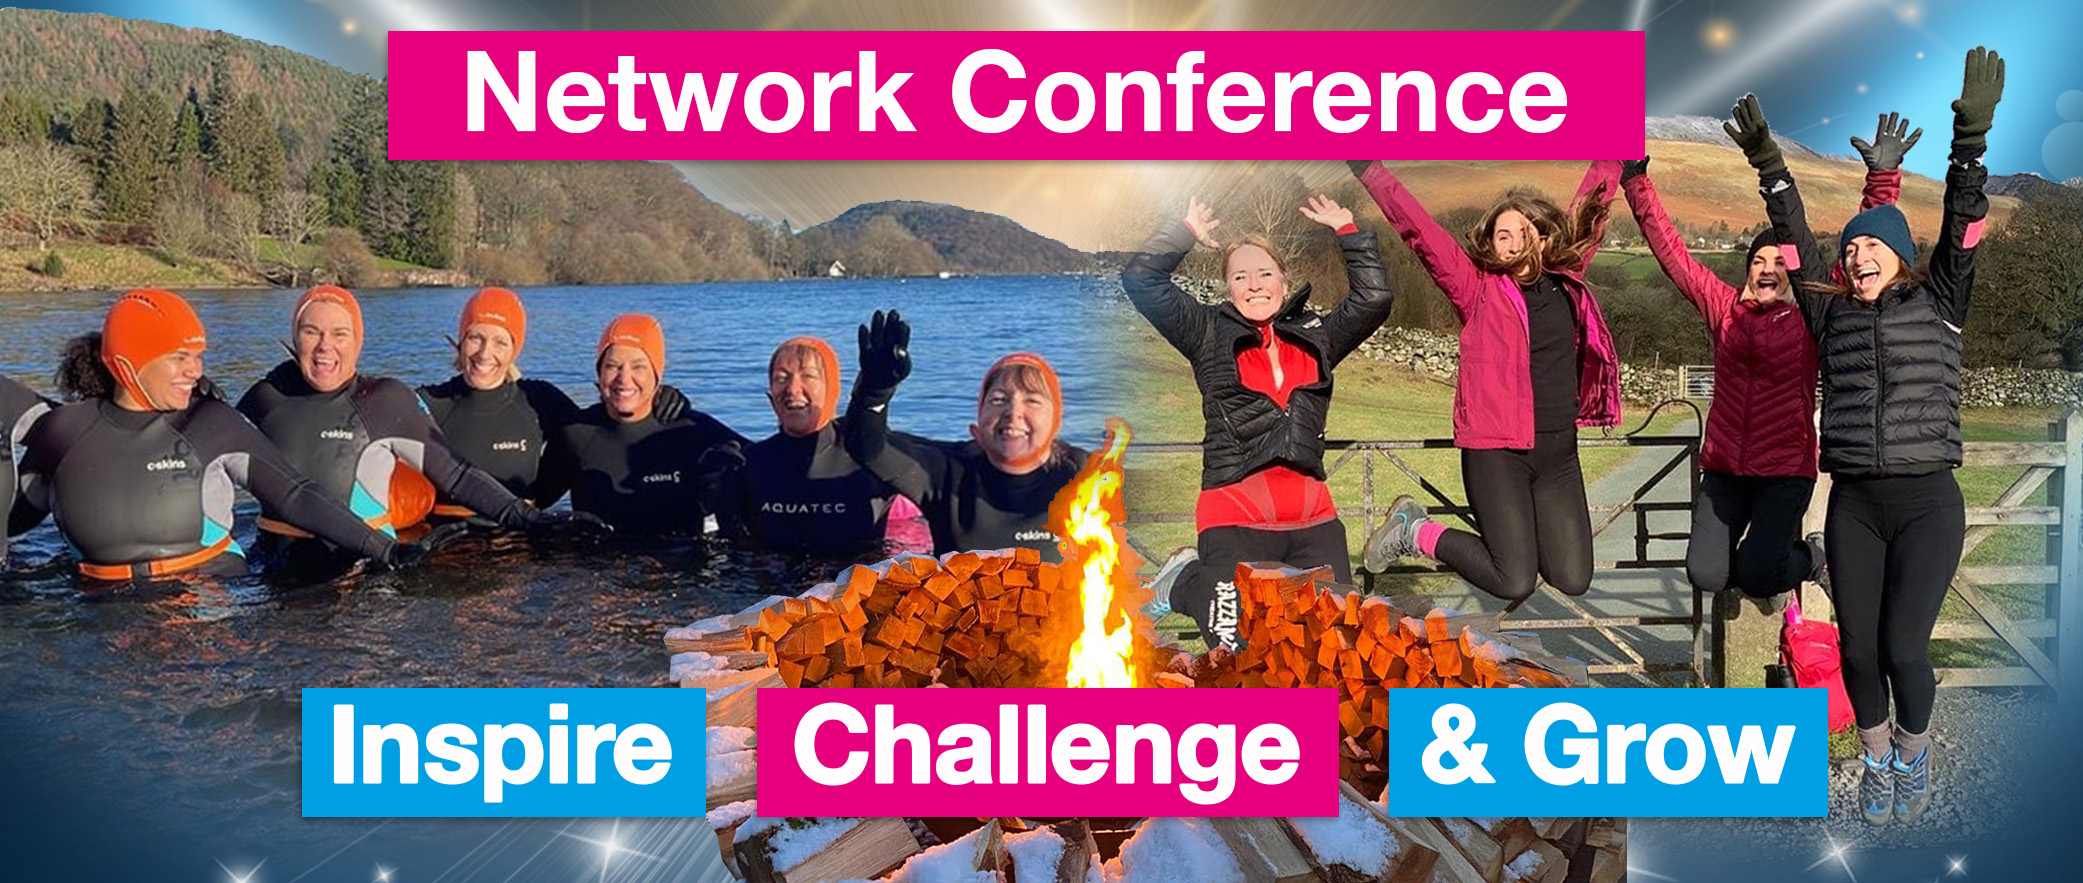 Network Conference to Inspire, Challenge and Grow